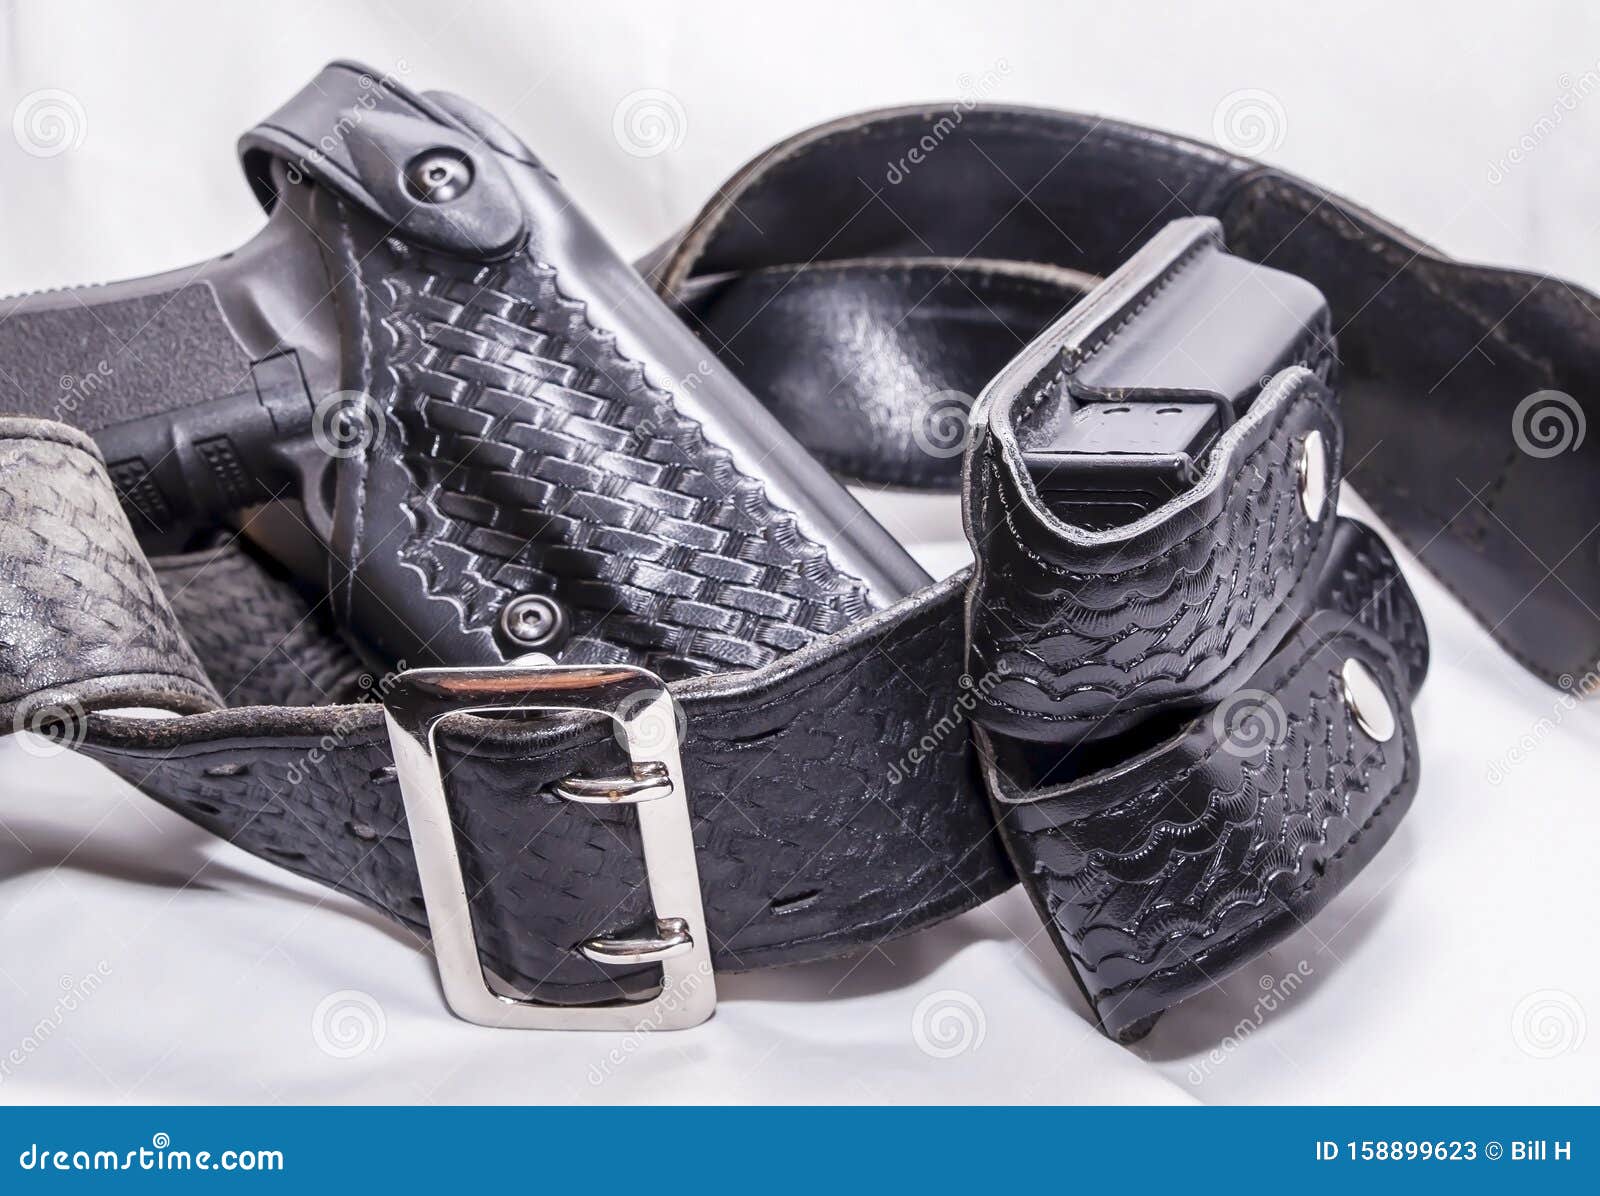 a worn police duty belt with a black pistol and two pistol magazine case wrapped up